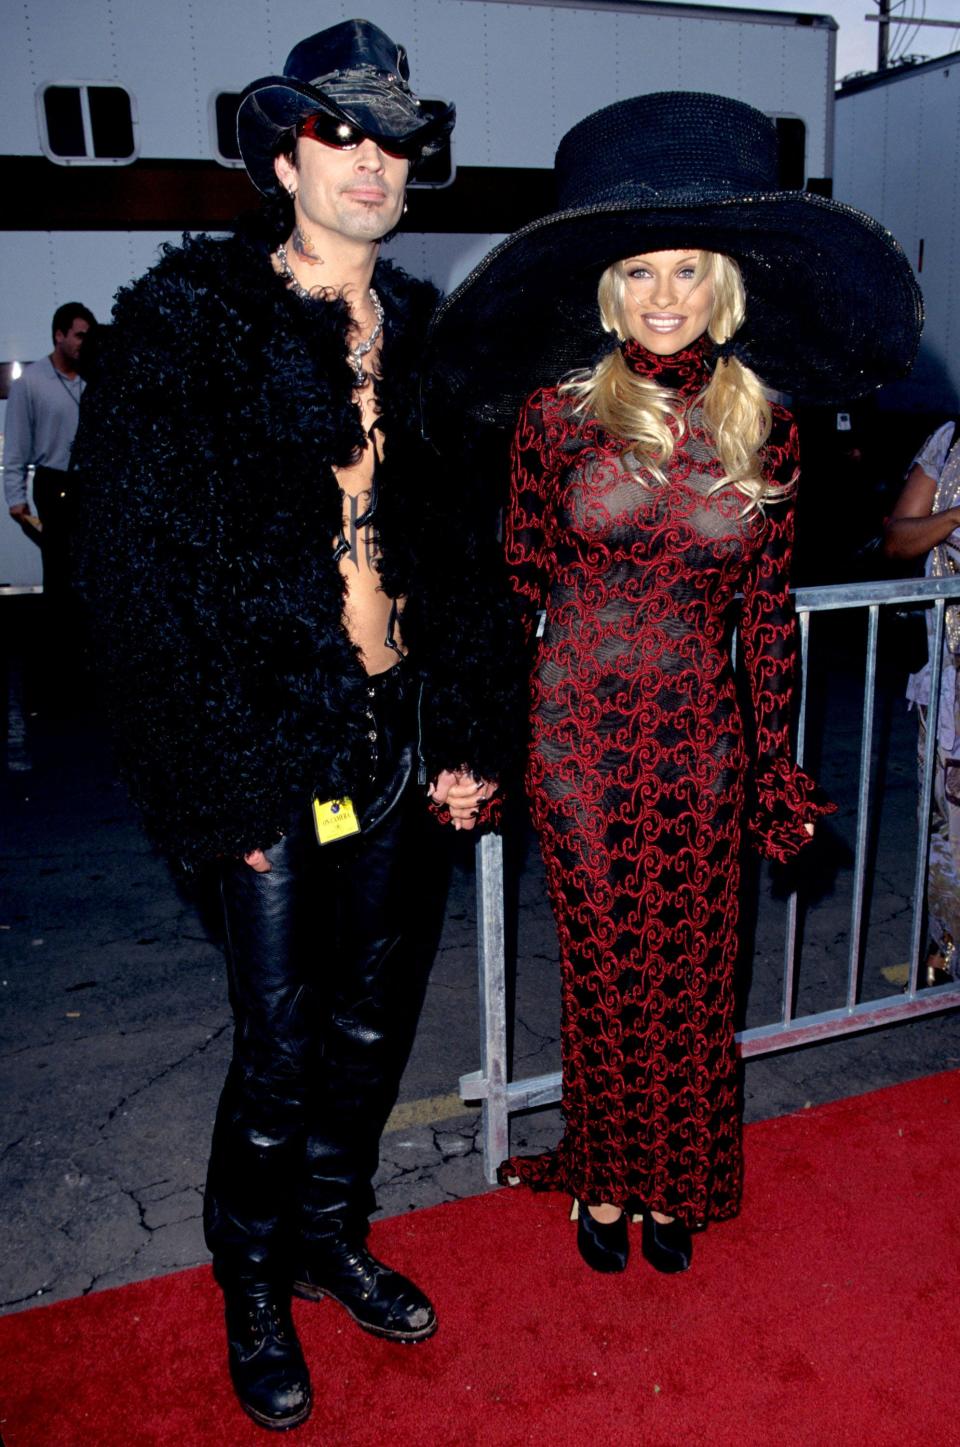 Pamela Anderson at the 1997 American Music Awards.